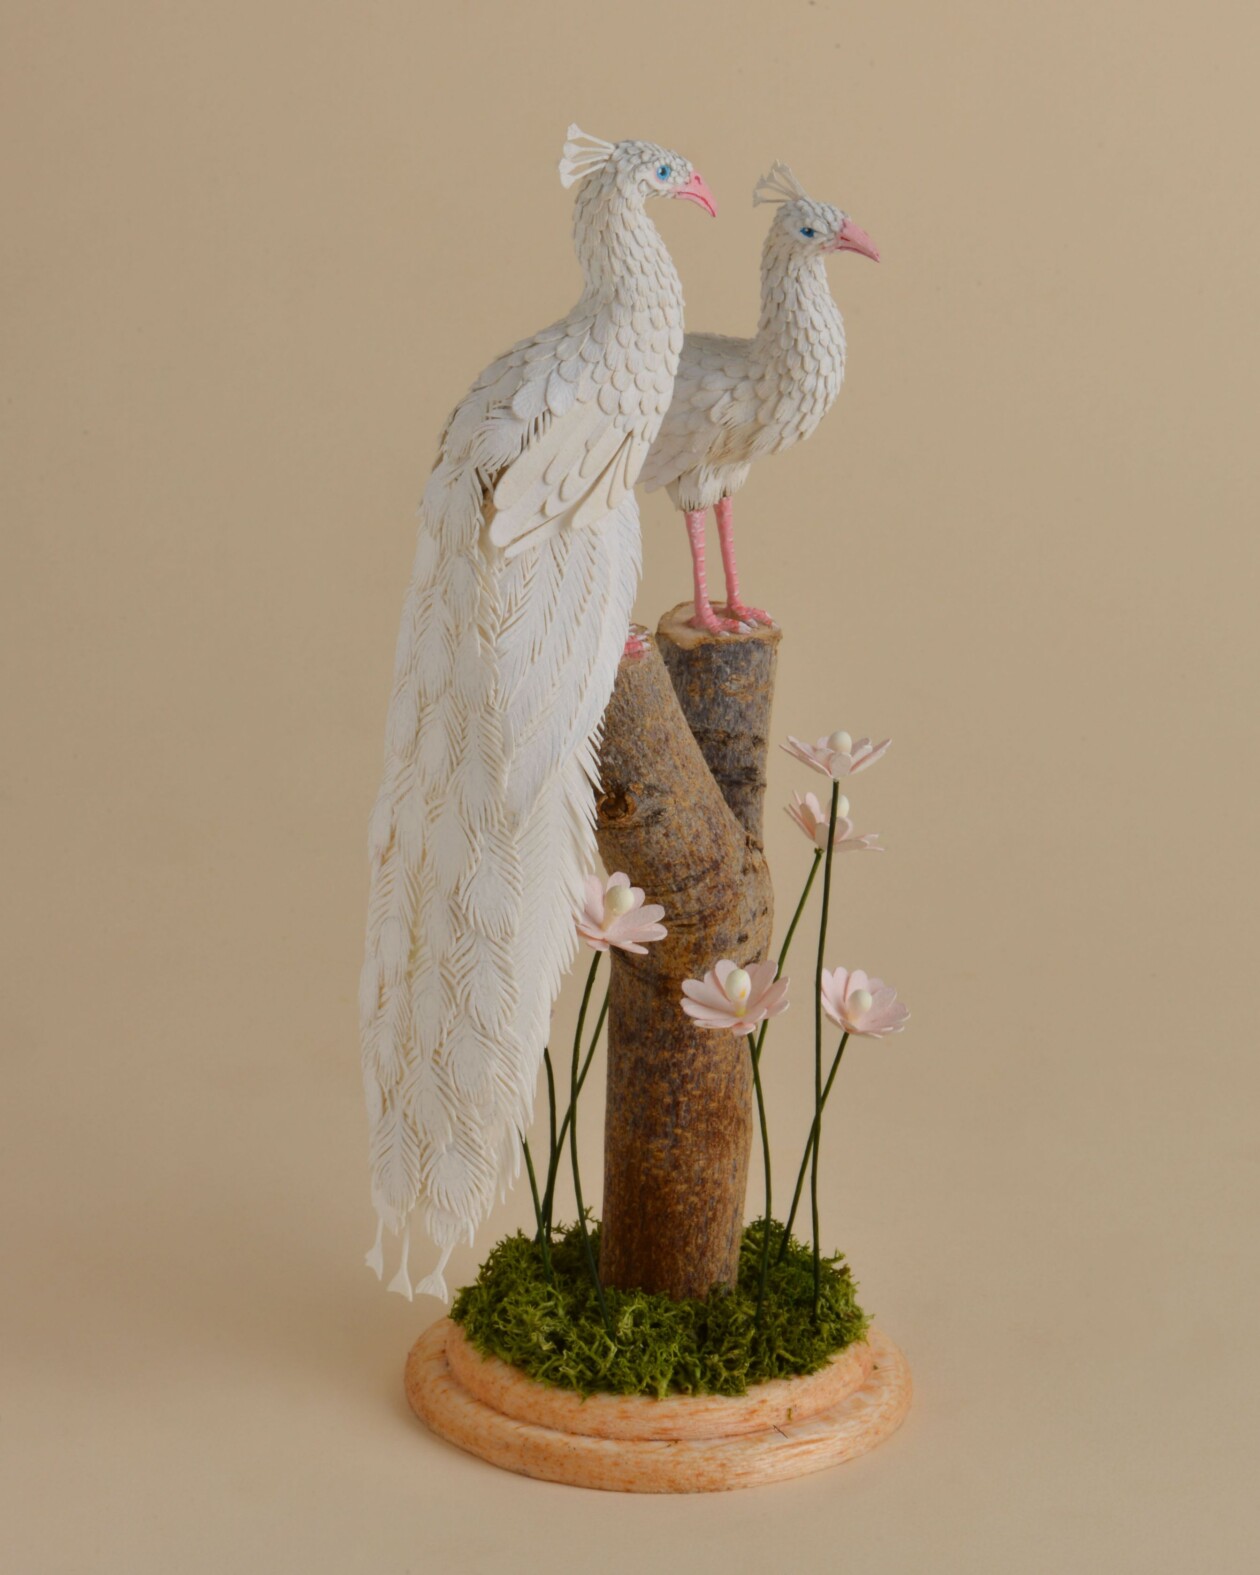 Miniature Bird Paper Sculptures With Whimsical Details By Nayan And Venus (1)